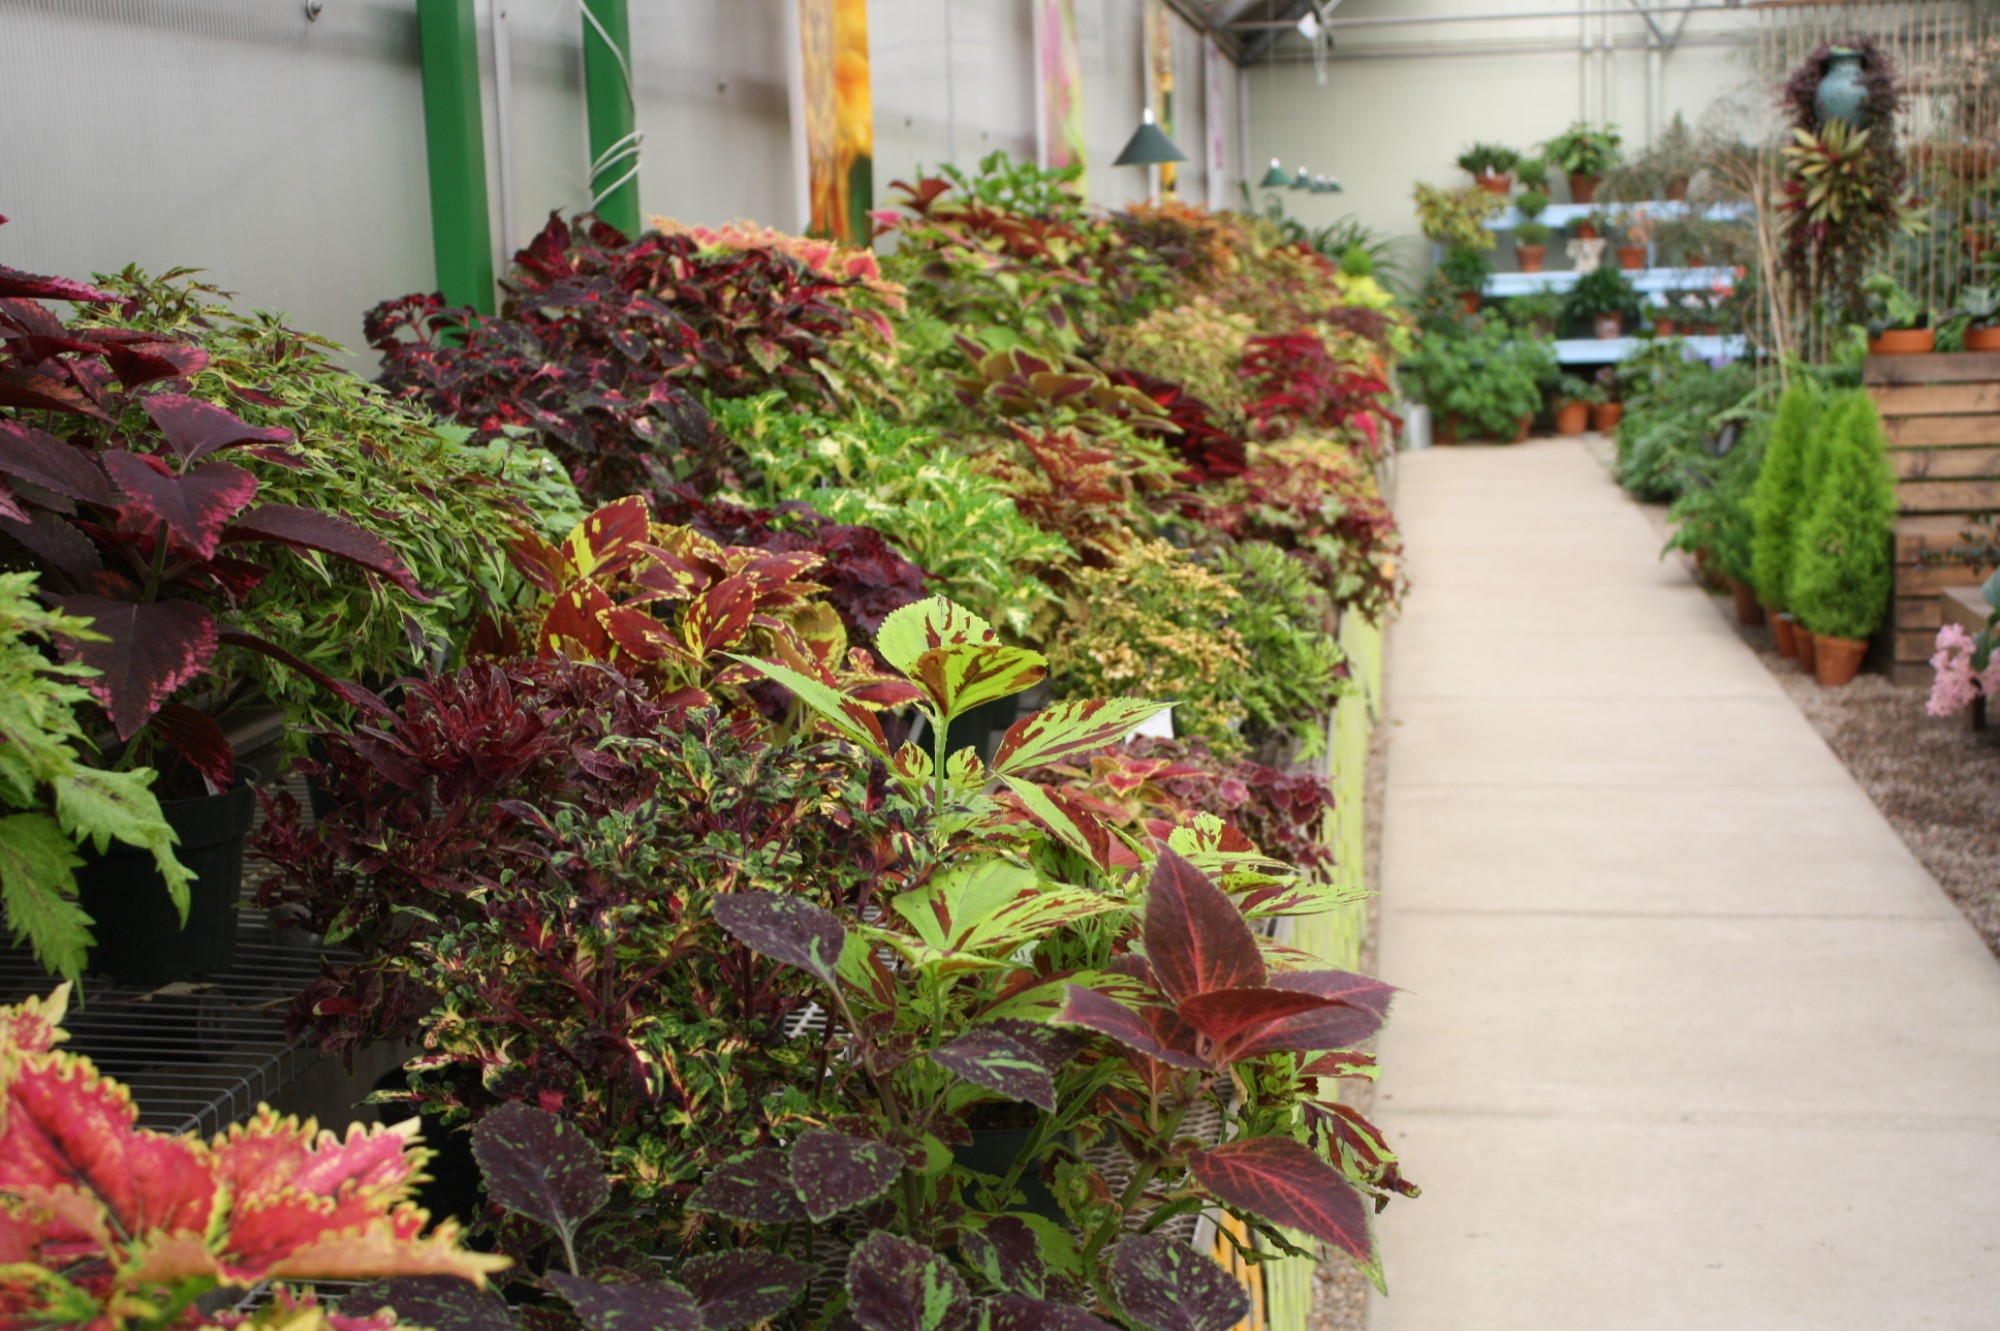 The coleus collection on display in the Gardeners Show House. Photo by Leslie Hunter.